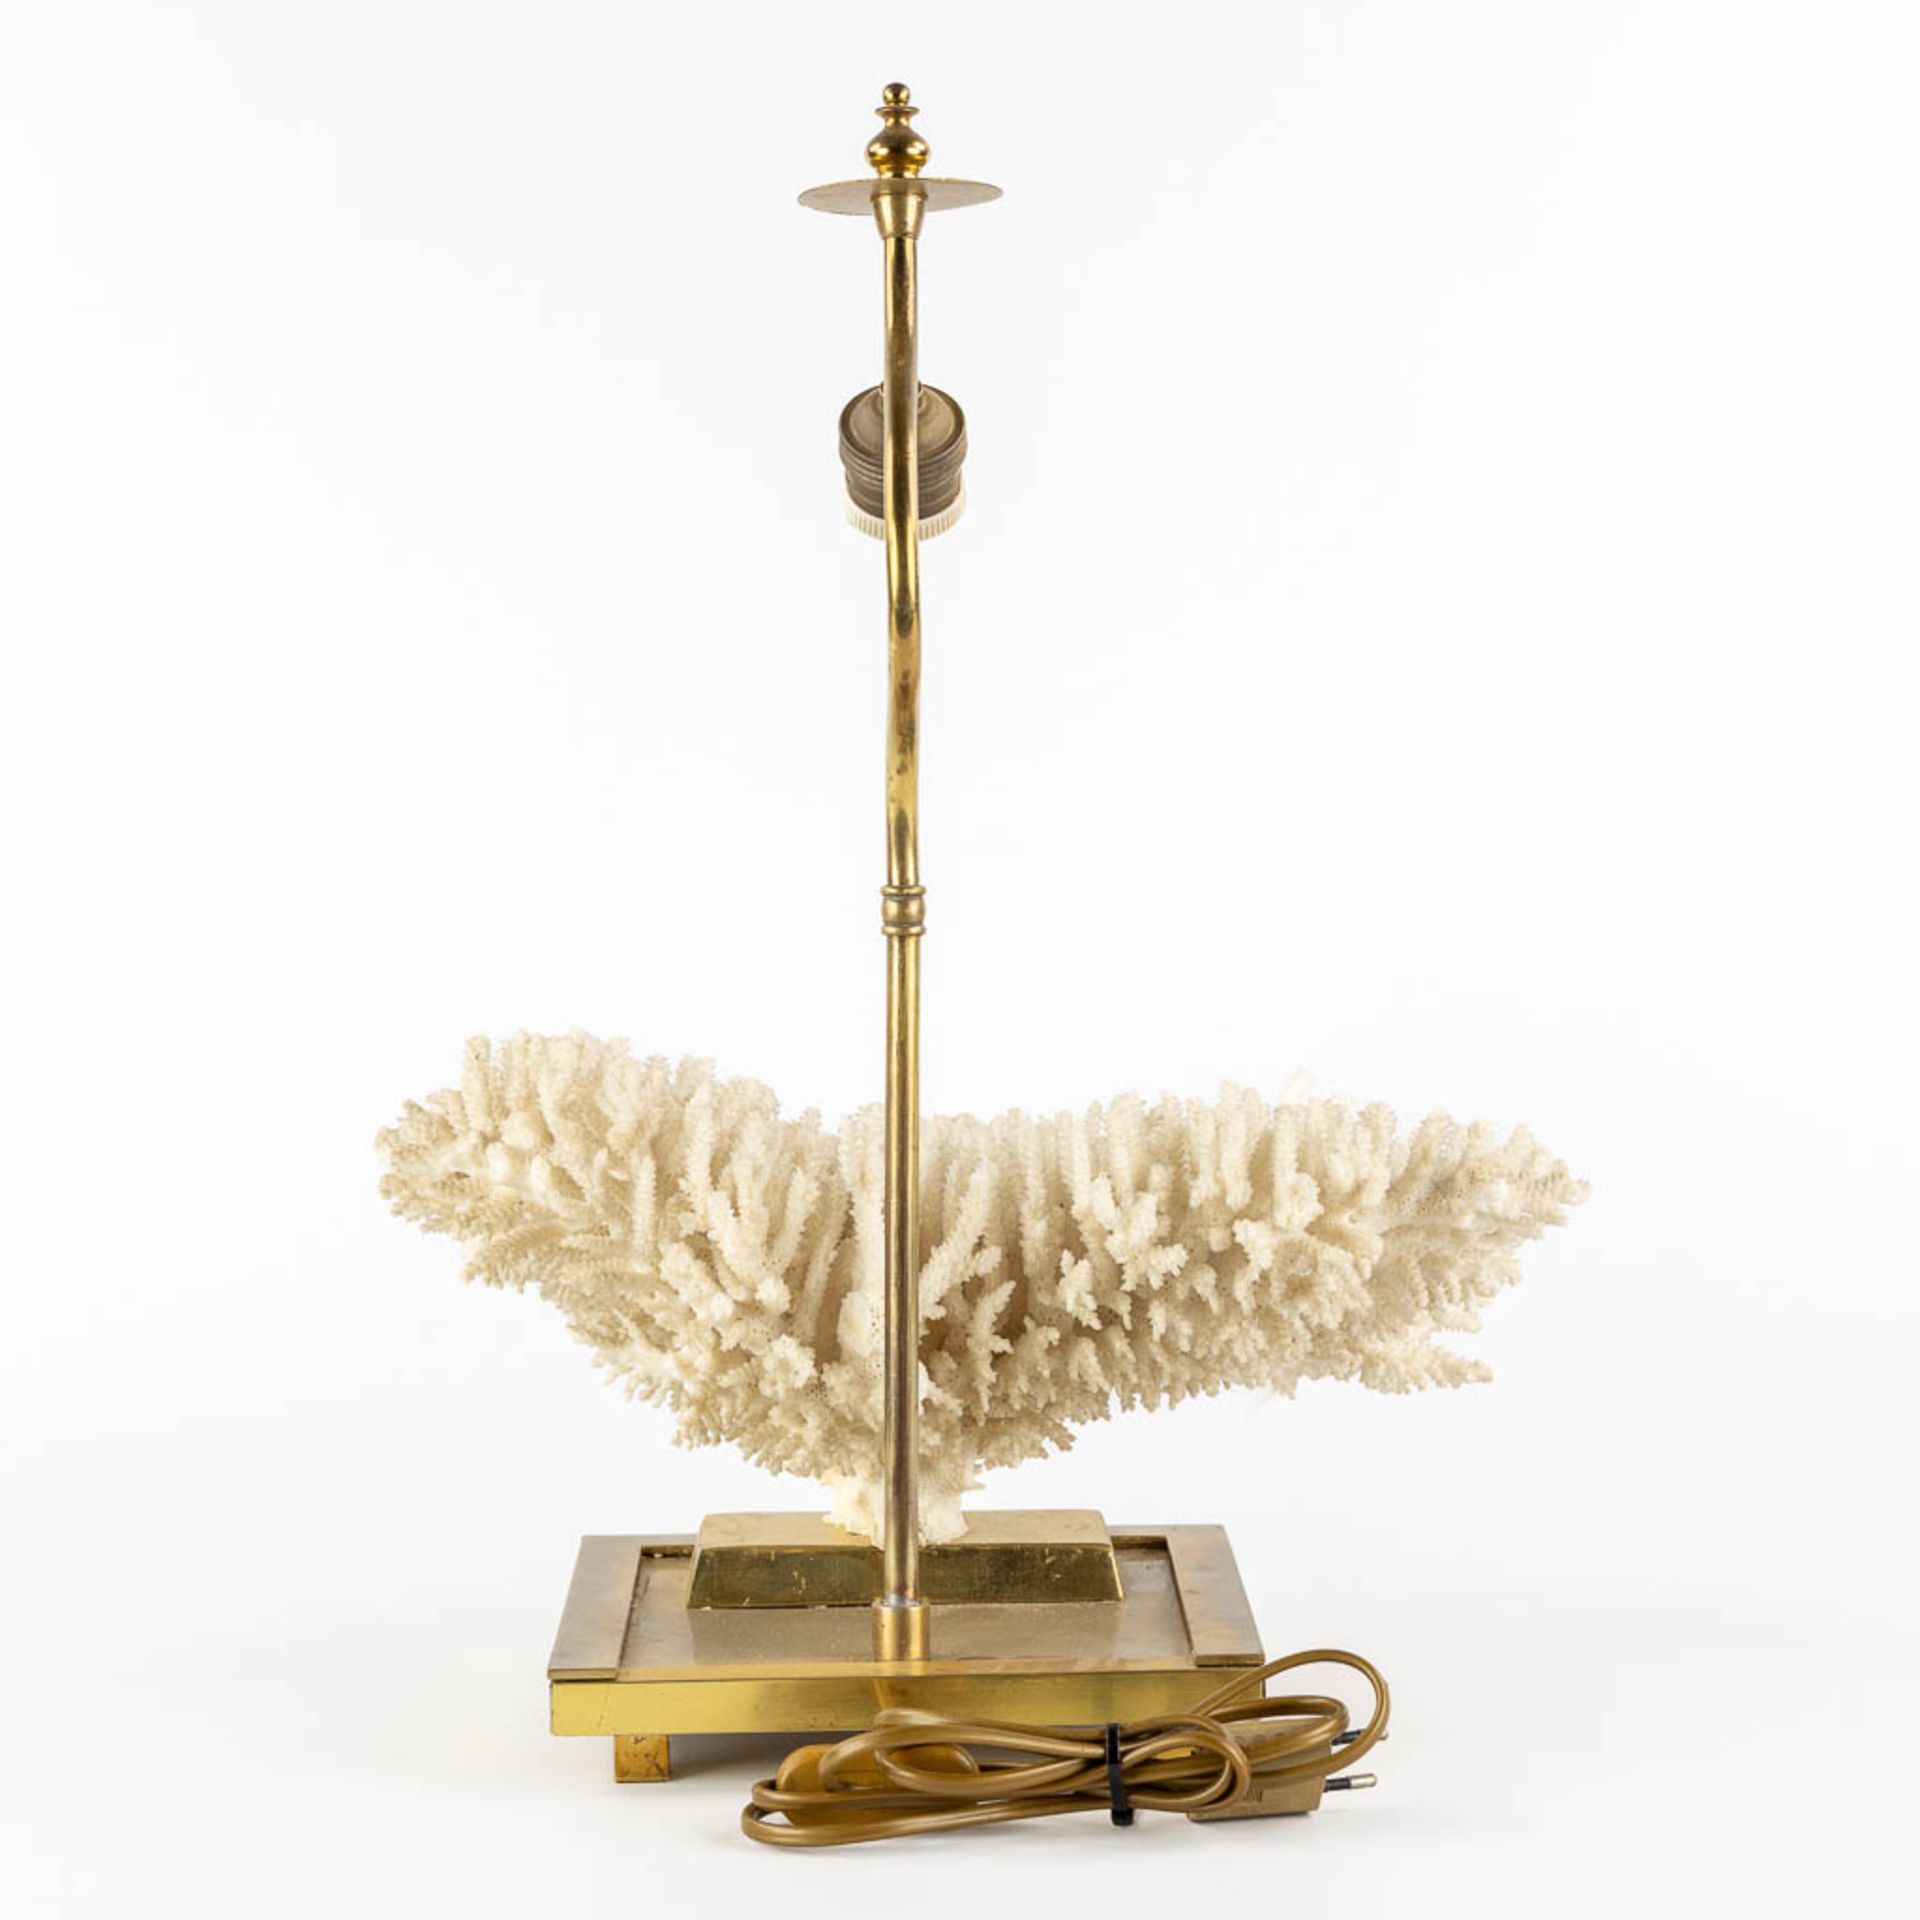 A decorative table lamp with a white coral. Circa 1980. (L:25 x W:39 x H:49 cm) - Image 5 of 10